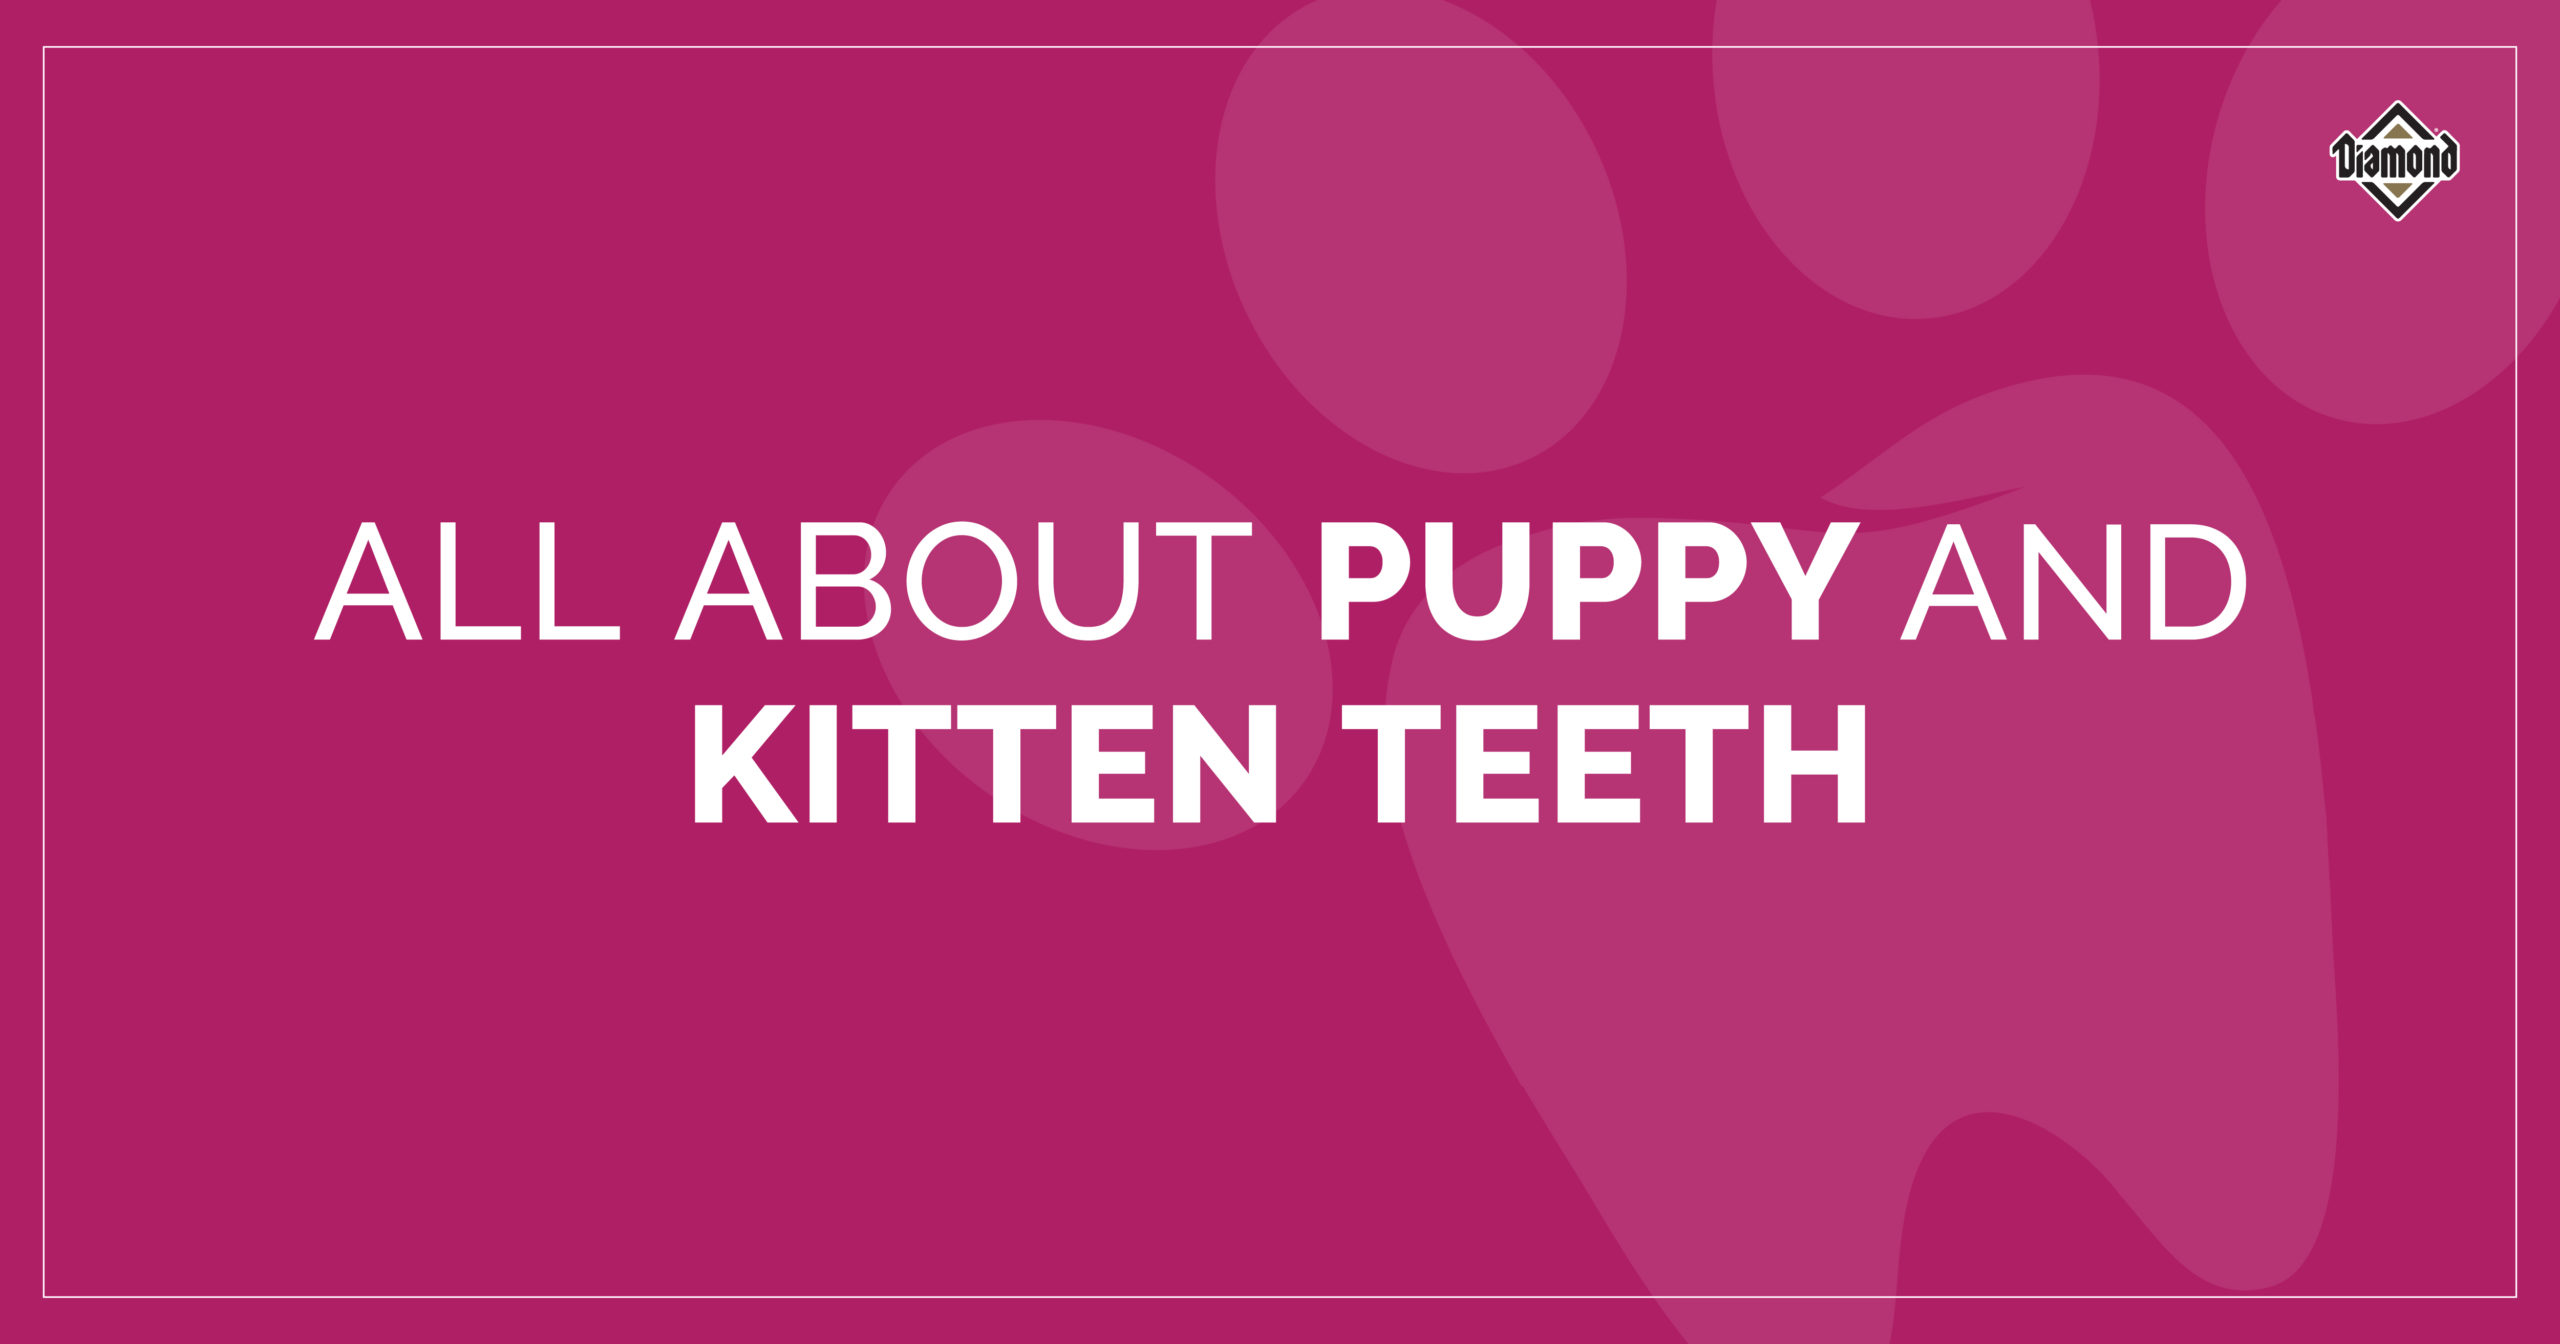 All About Puppy and Kitten Teeth text graphic | Diamond Pet Foods